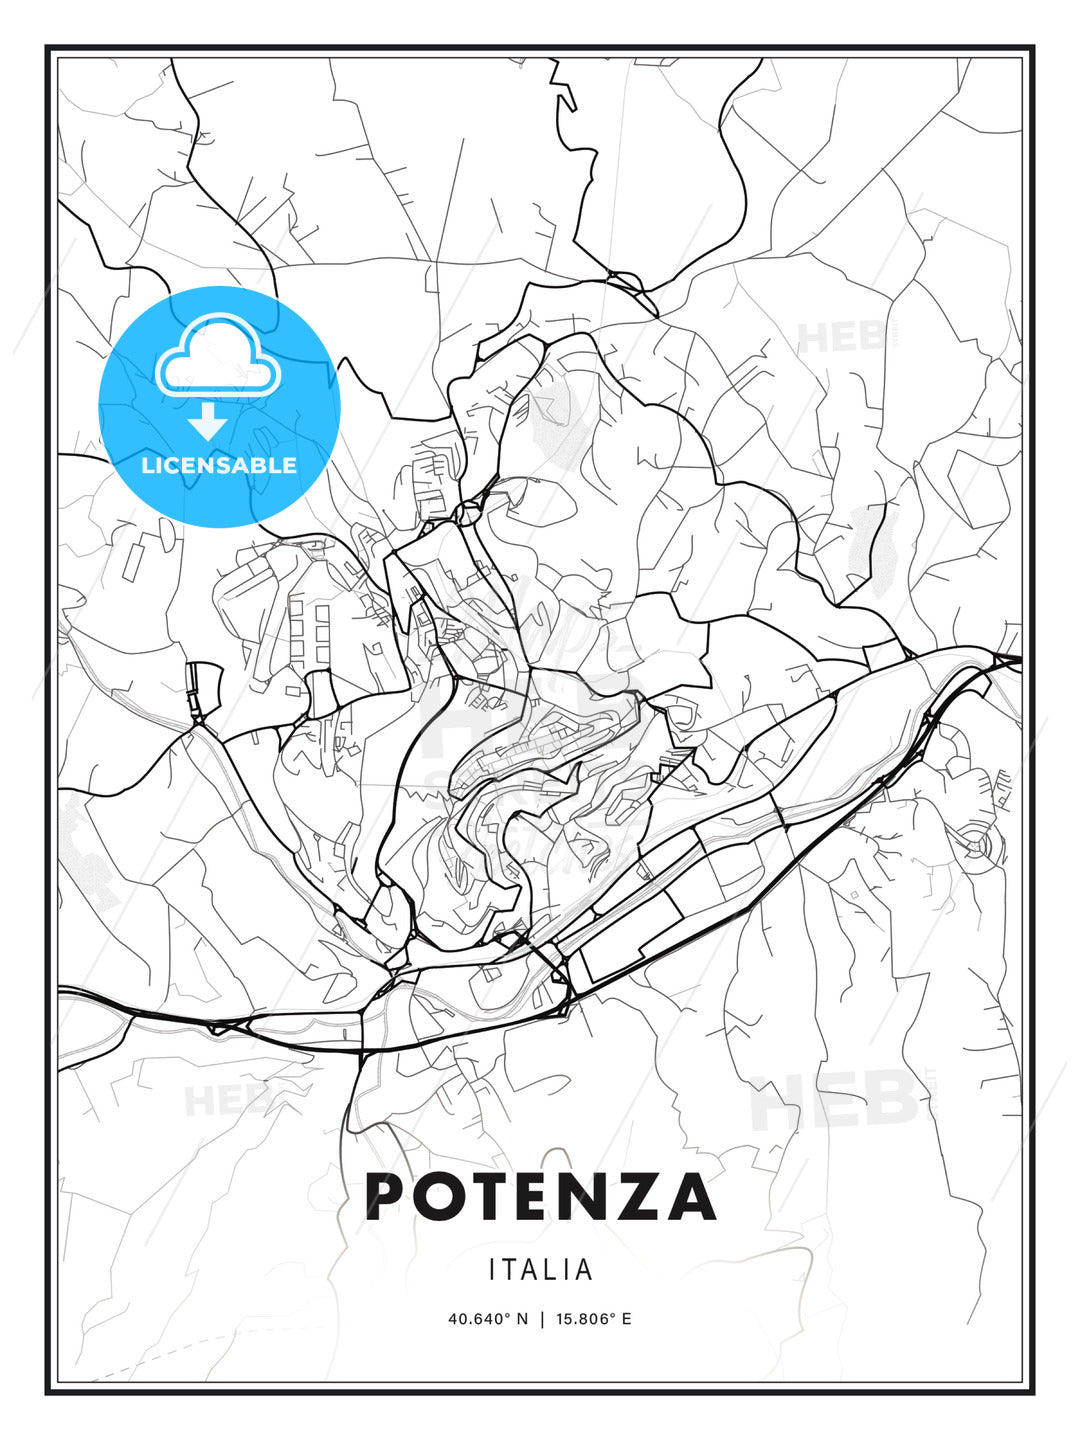 Potenza, Italy, Modern Print Template in Various Formats - HEBSTREITS Sketches